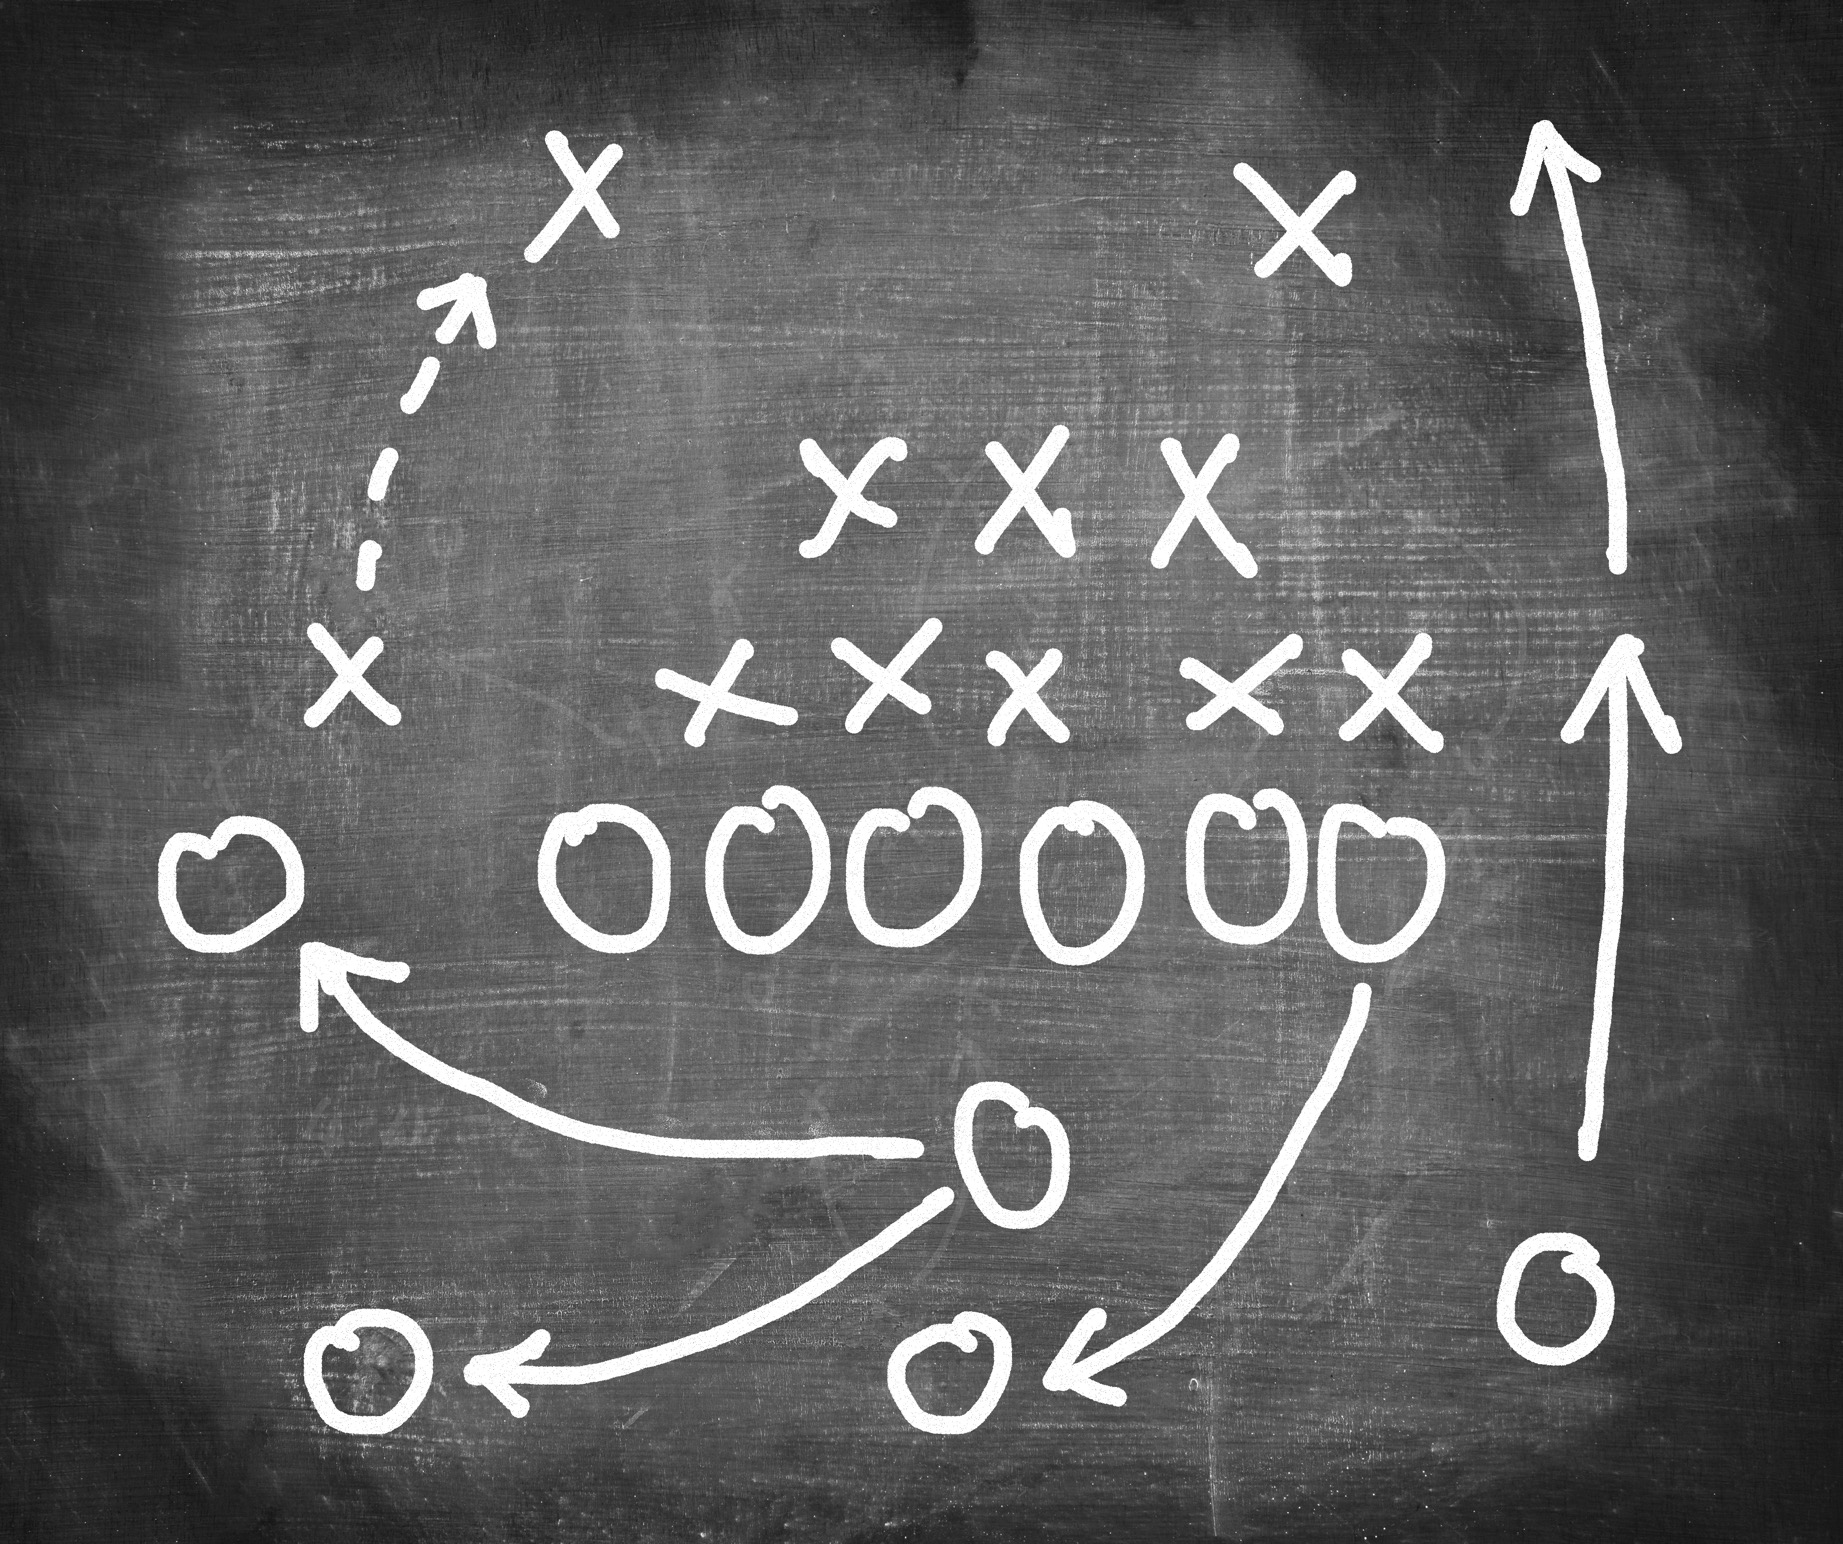 Football strategy laid out on chalk board with X's and O's